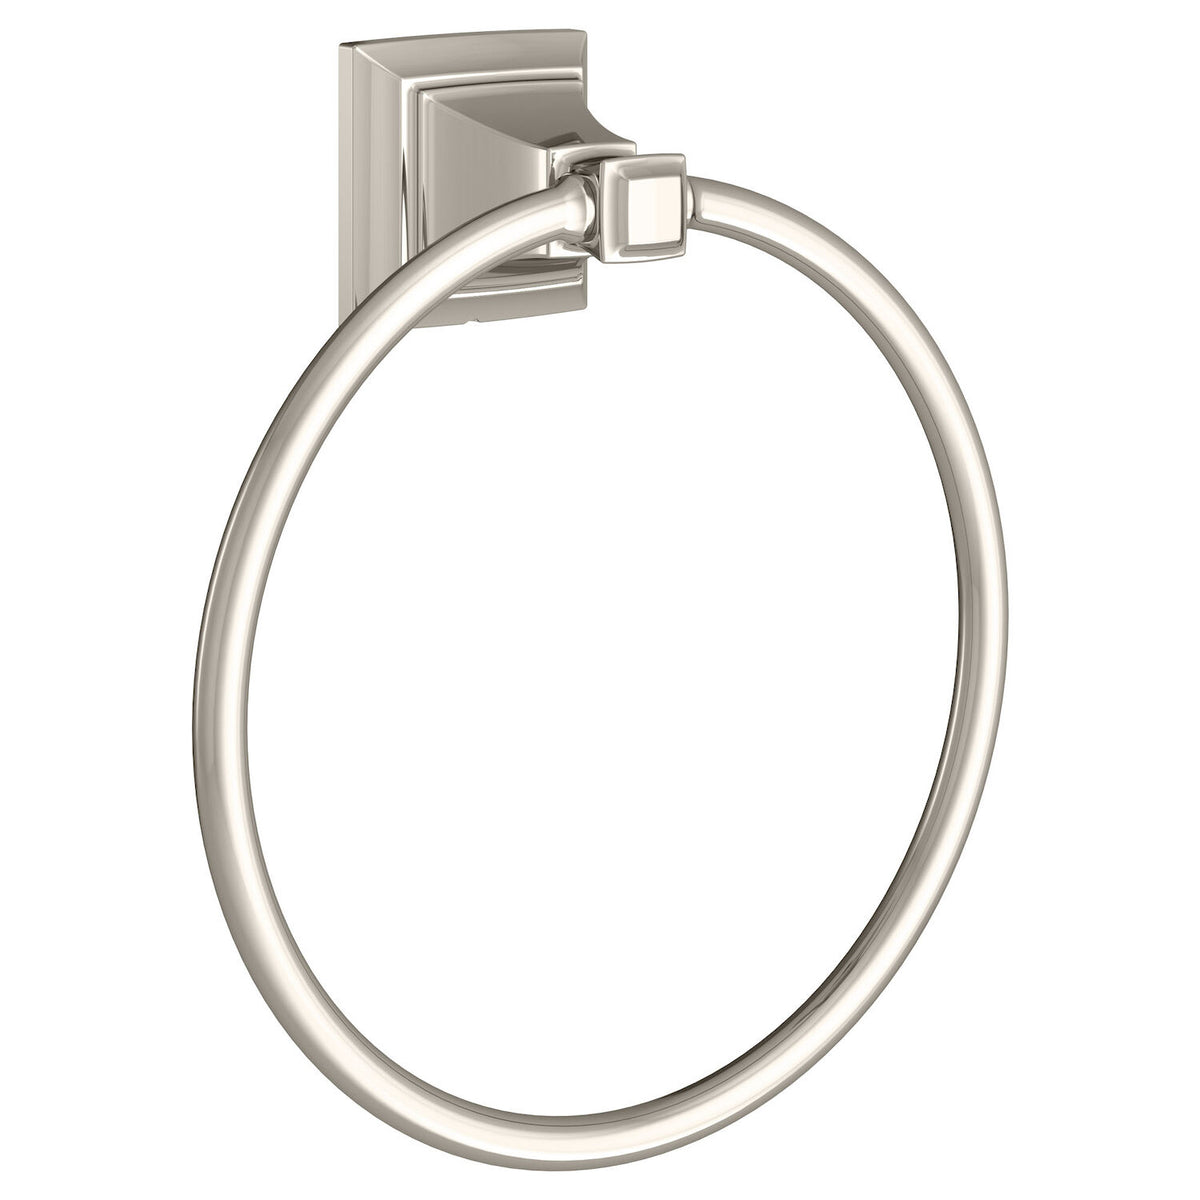 TOWN SQUARE TOWEL RING